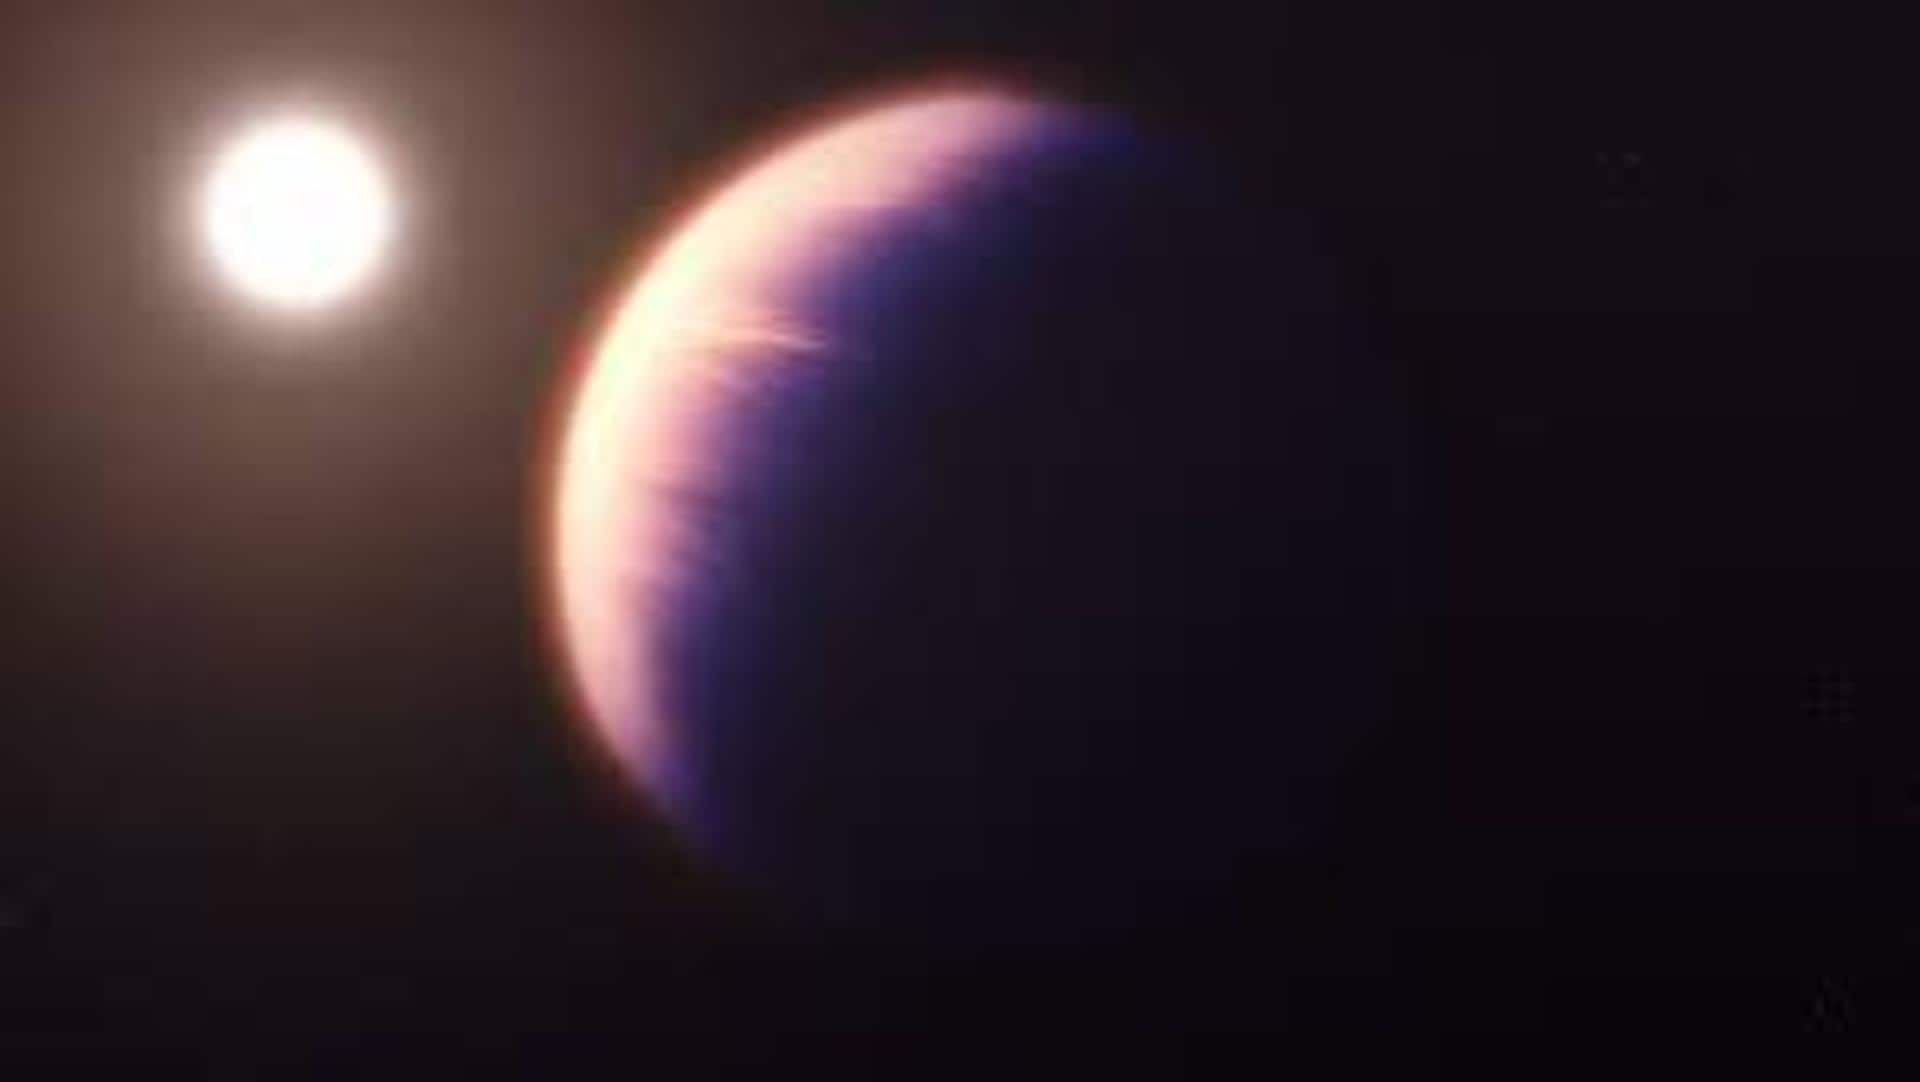 NASA's James Webb reveals 'game-changing' details of an exoplanet atmosphere